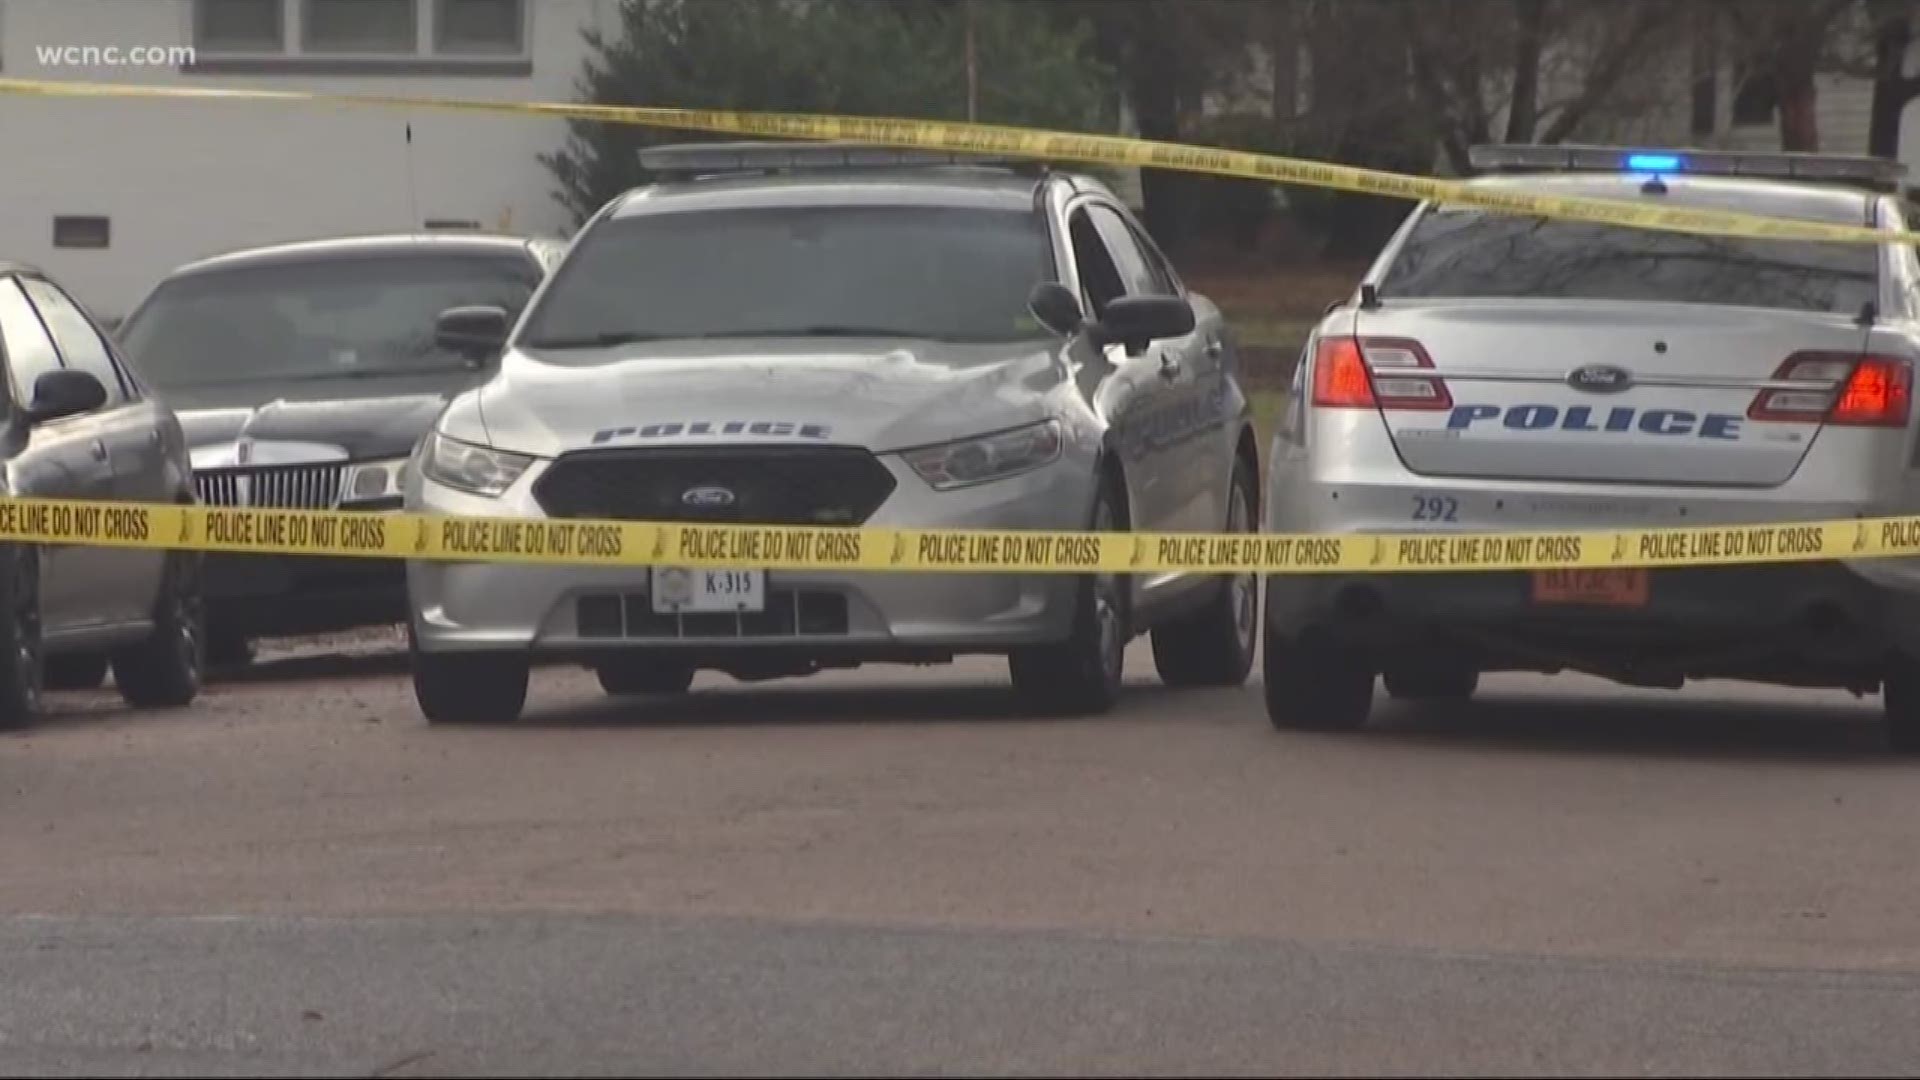 A taxi cab employee was shot multiple times during a robbery in Kannapolis.